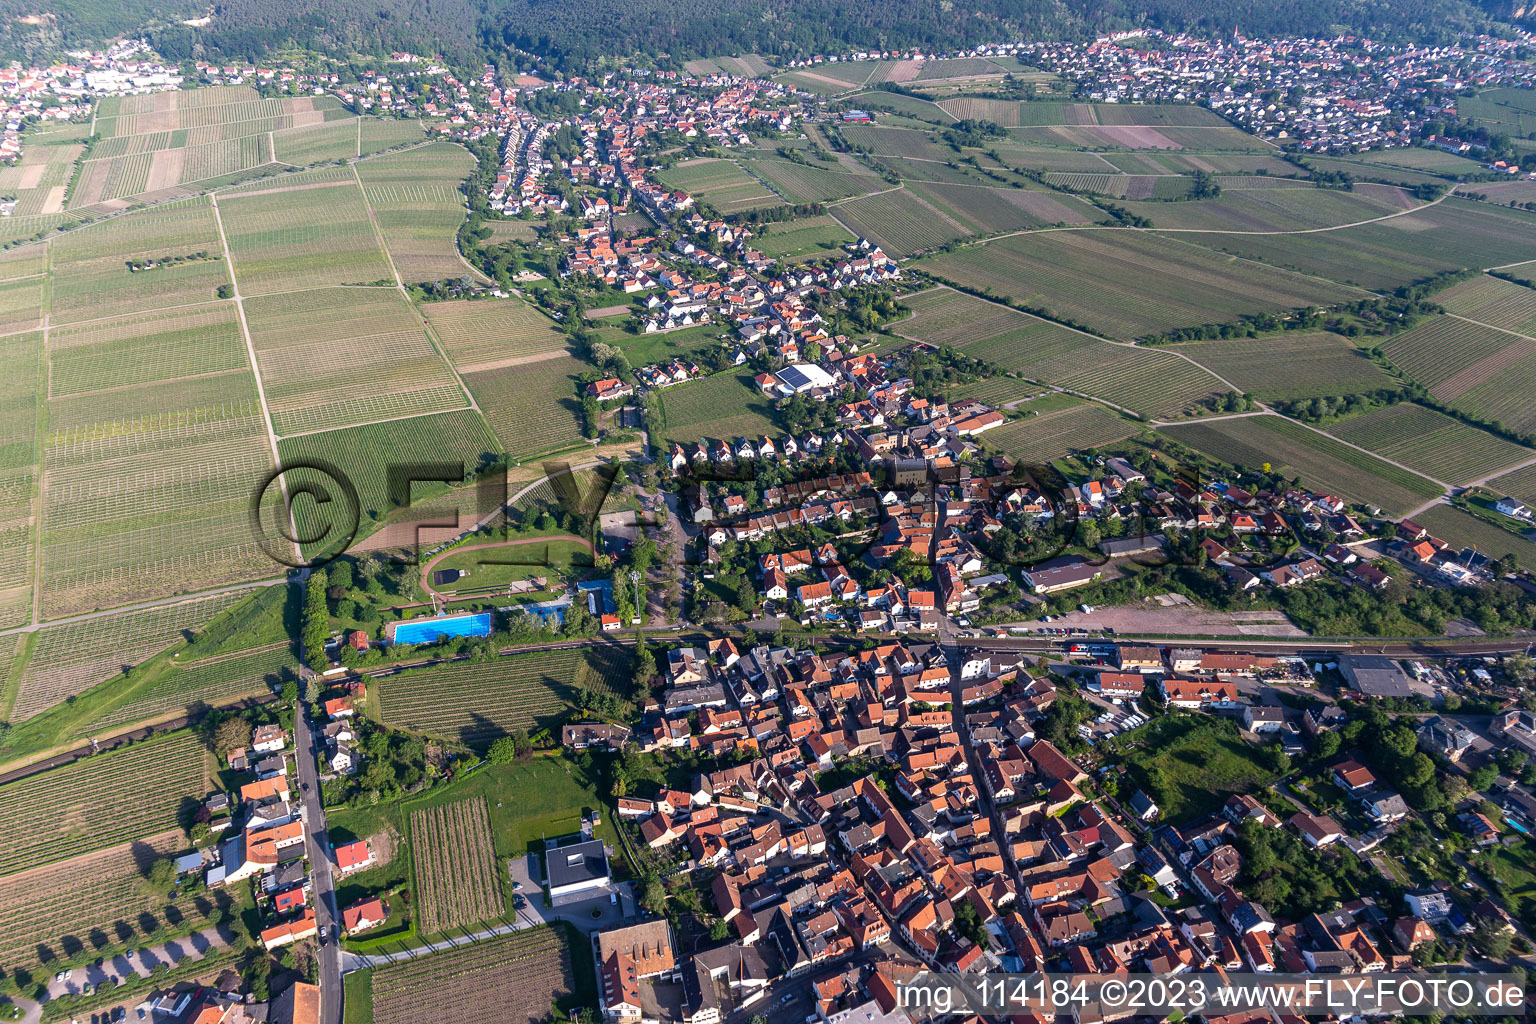 Aerial photograpy of District Mußbach in Neustadt an der Weinstraße in the state Rhineland-Palatinate, Germany